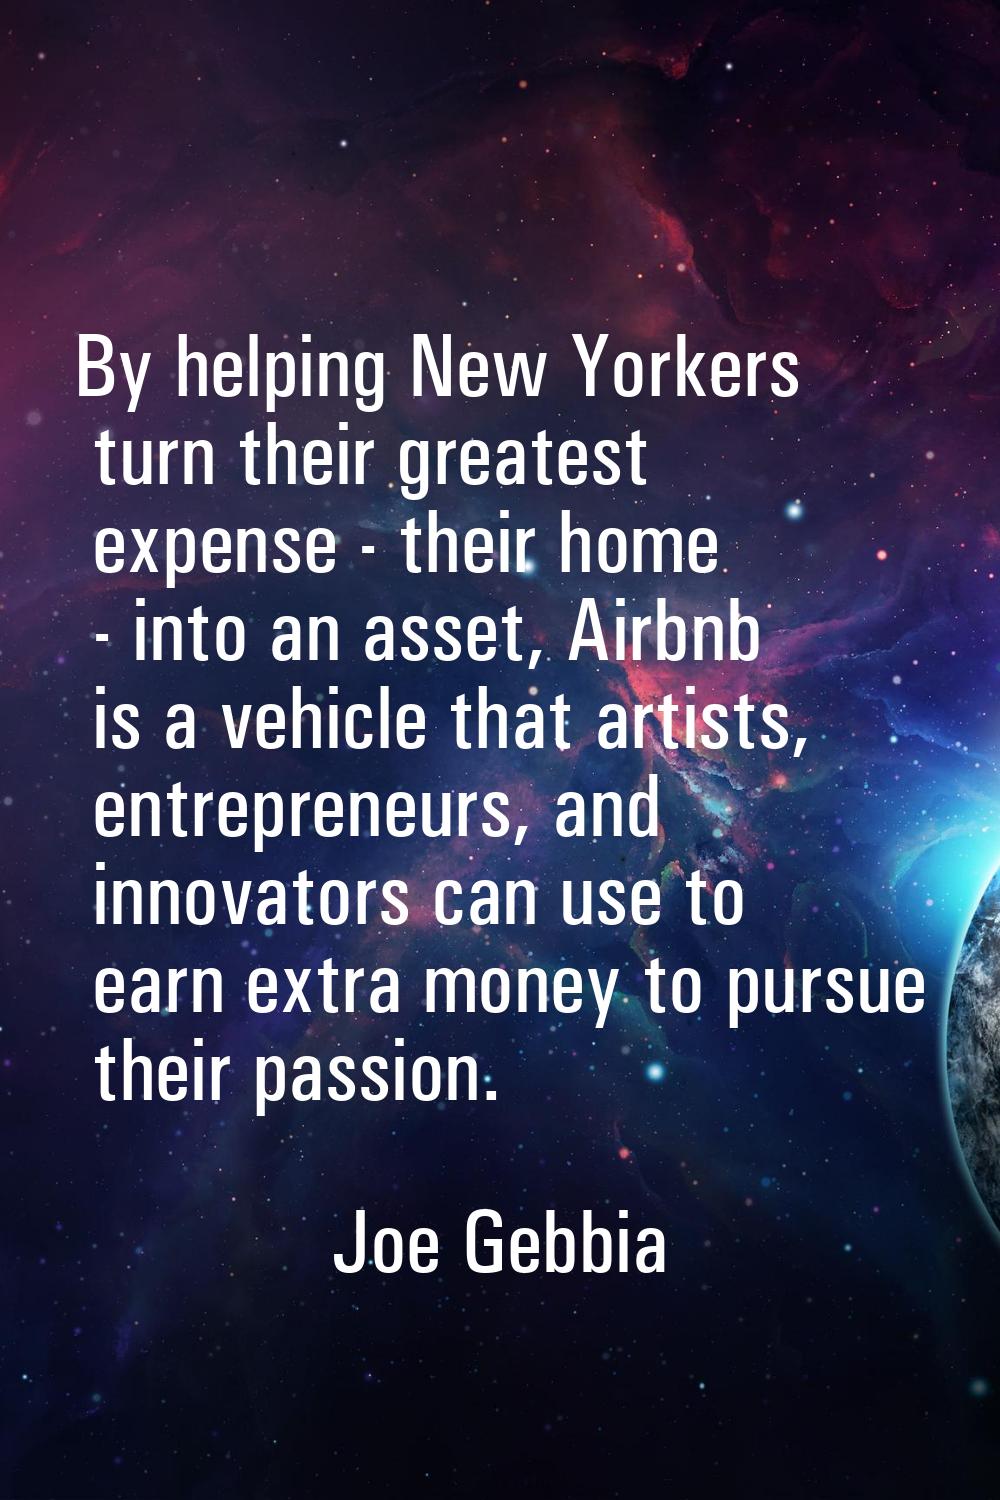 By helping New Yorkers turn their greatest expense - their home - into an asset, Airbnb is a vehicl